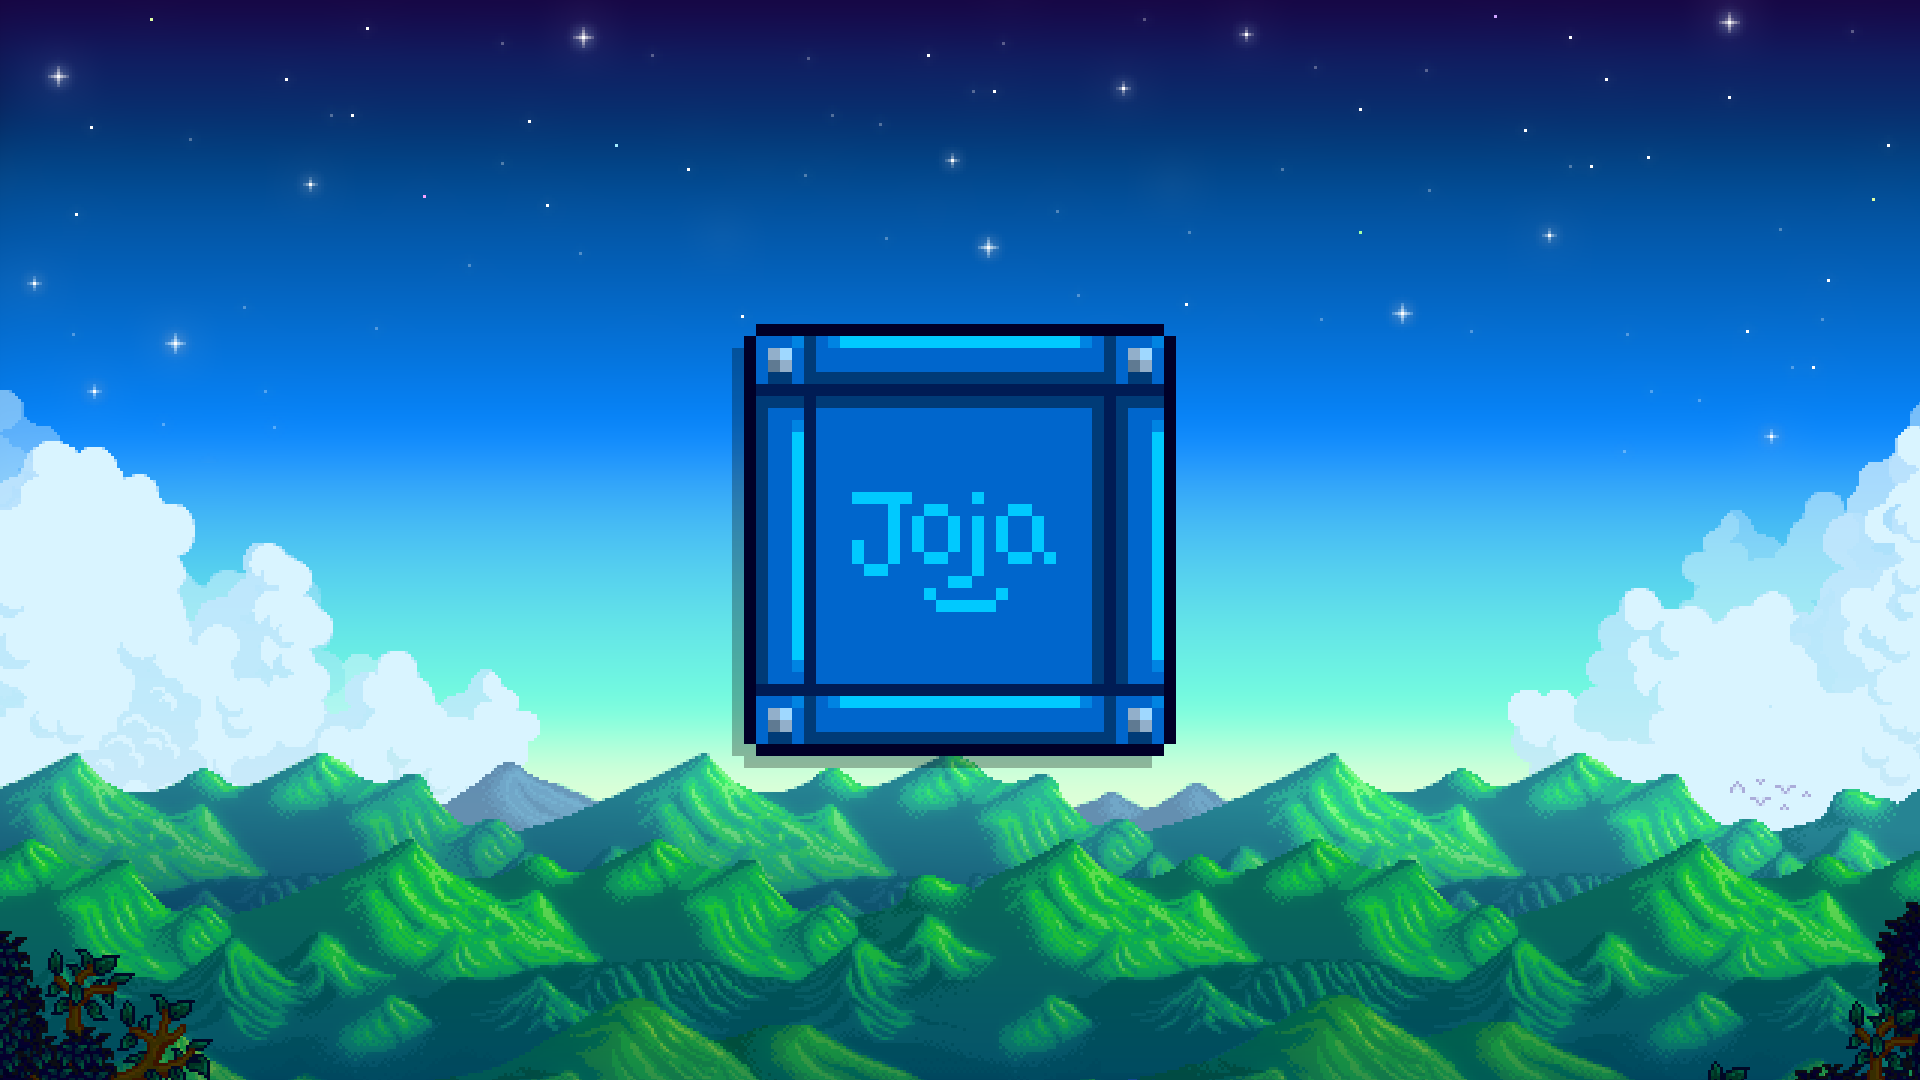 Icon for Joja Co. Member Of The Year